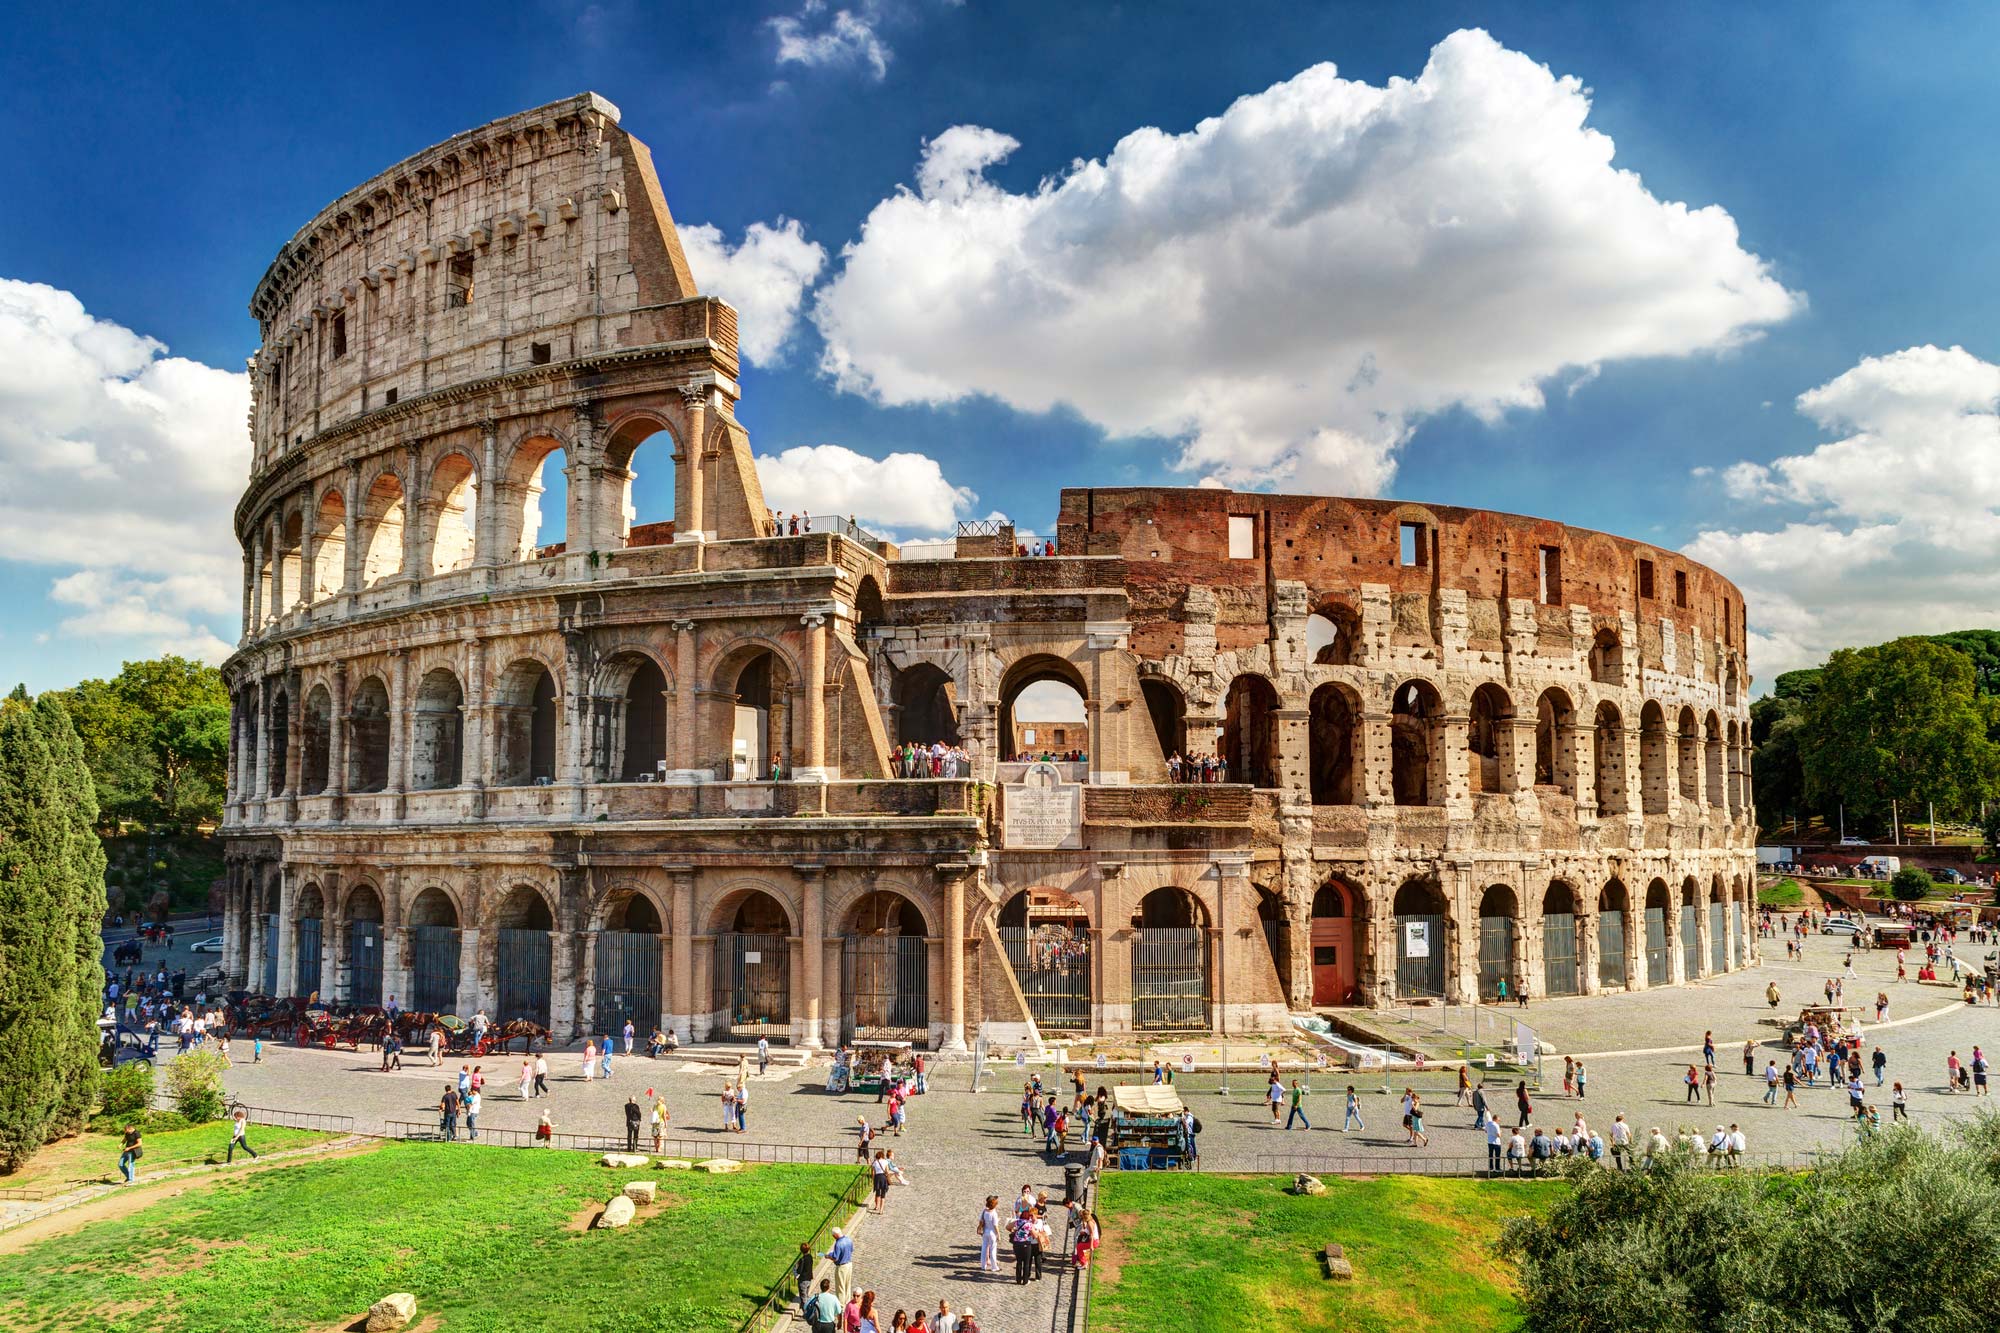 What happens in the Colosseum of Rome?